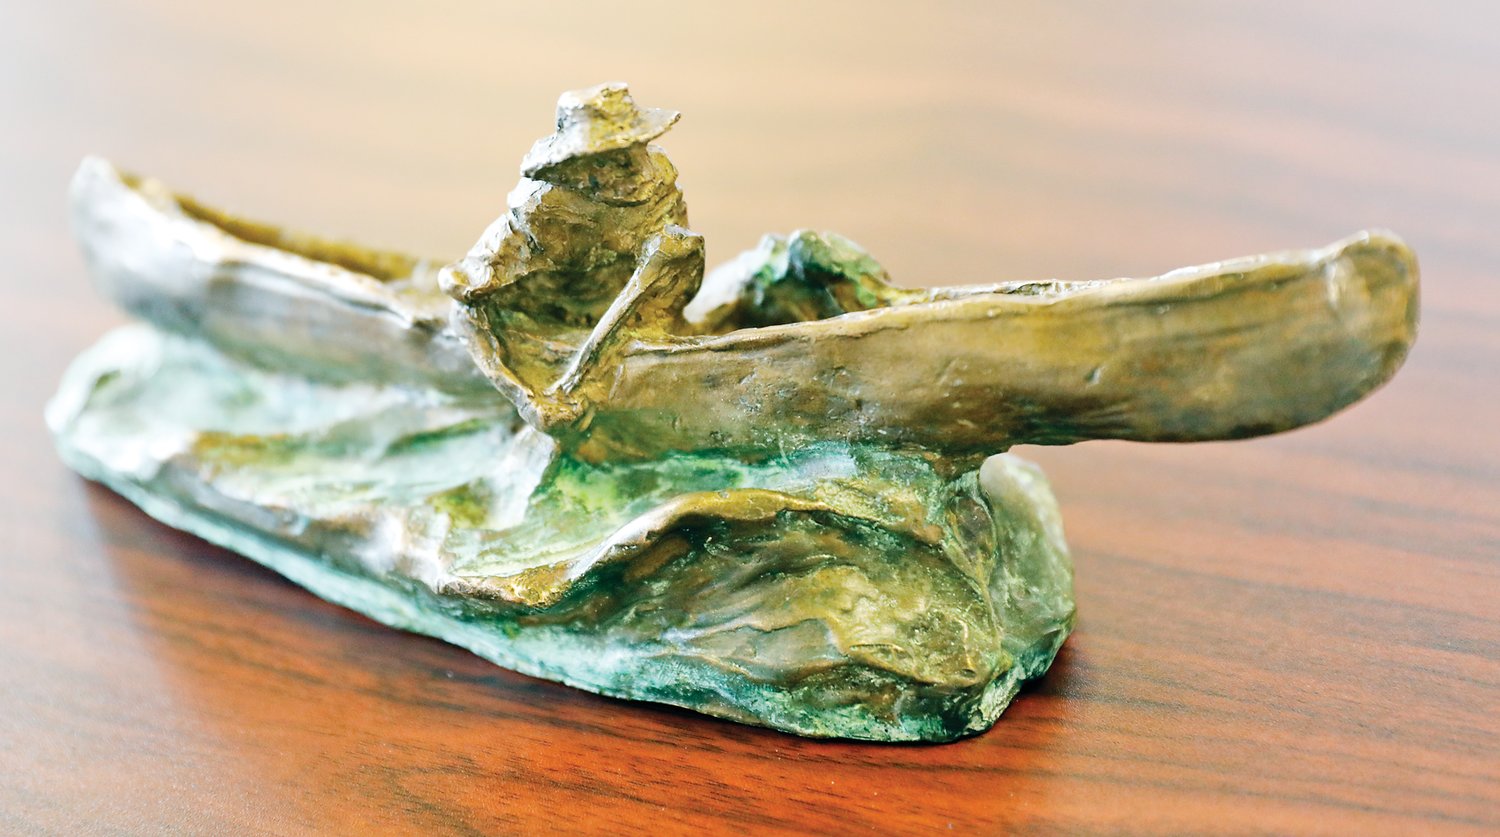 A model of a bronze sculpture proposed for Whiteside Park in Ely shows a lone paddler.